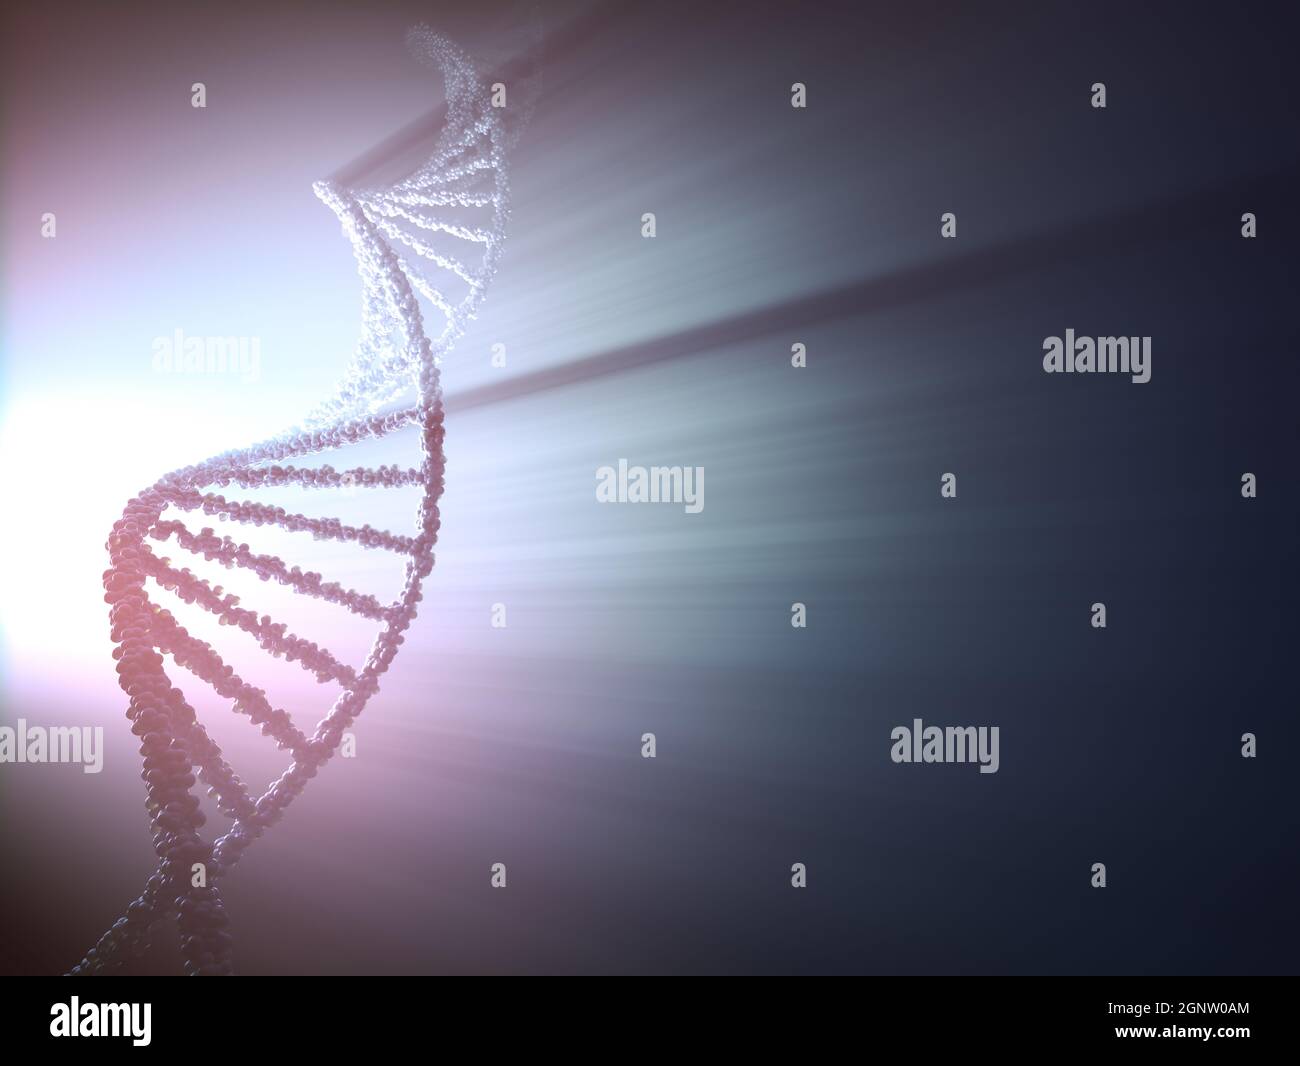 3D illustration of DNA molecule with shadow and beams of light. Stock Photo